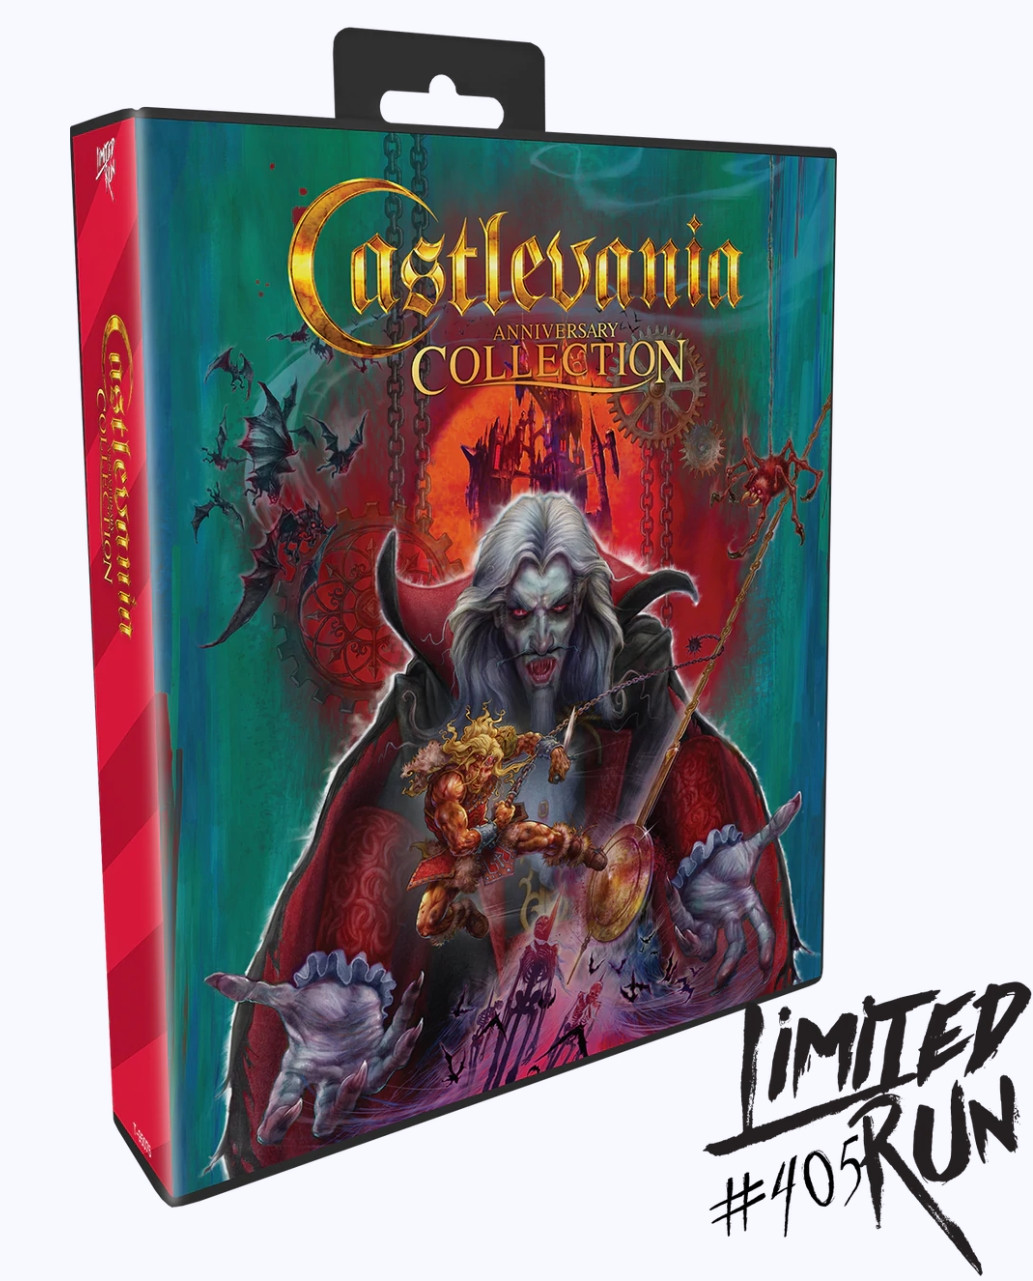 Castlevania - Anniversary Collection Bloodlines Edition (Limited Run Games) kopen?